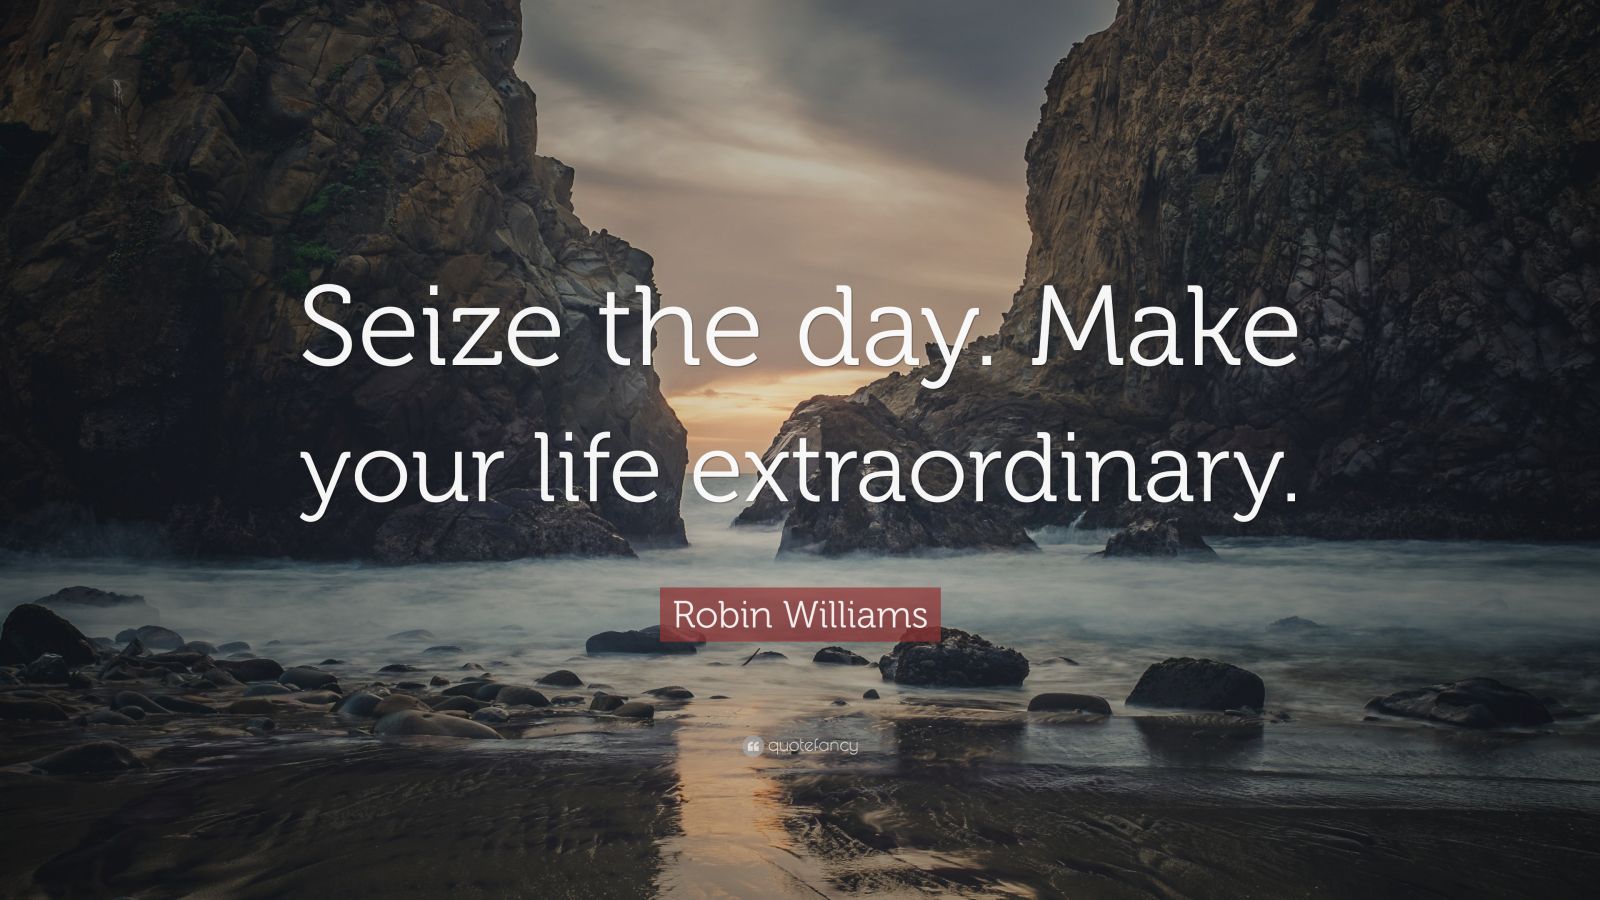 Robin Williams Quote: "Seize the day. Make your life ...